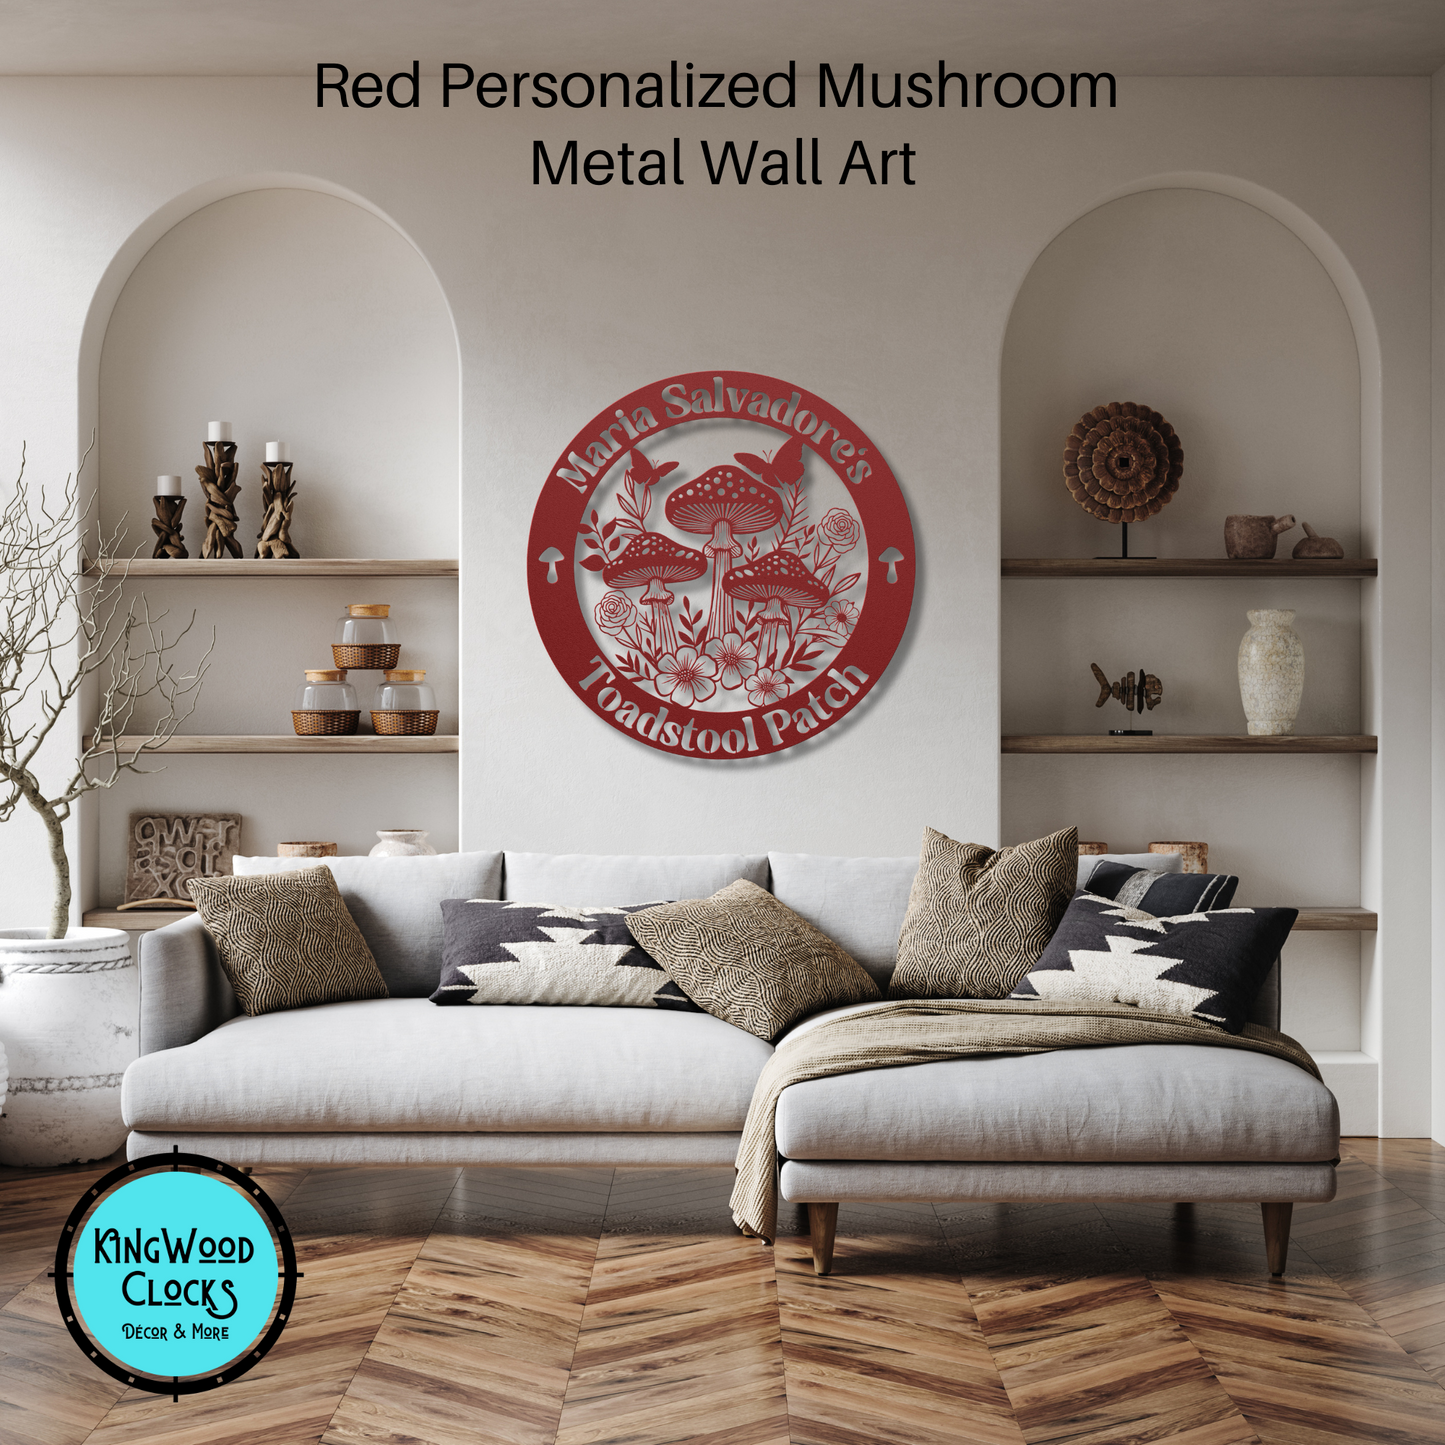 Personalized Mushroom Metal Wall Art red over couch in family room